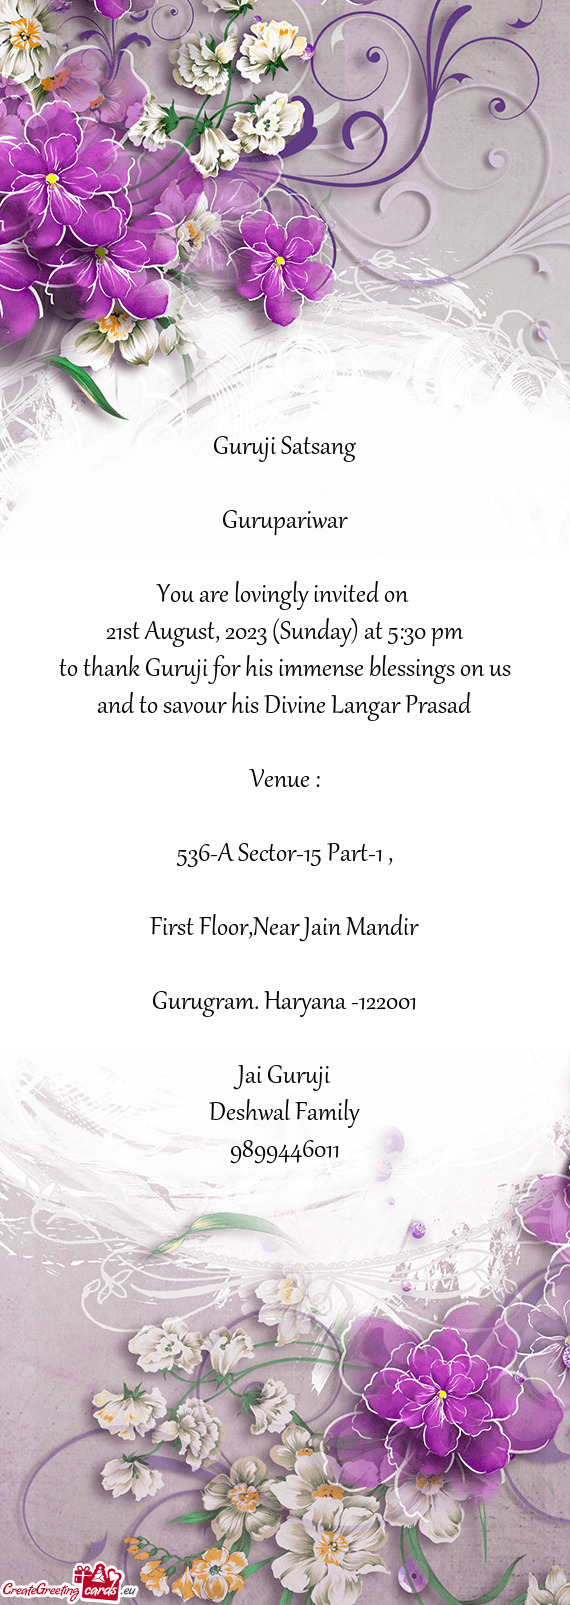 21st August, 2023 (Sunday) at 5:30 pm